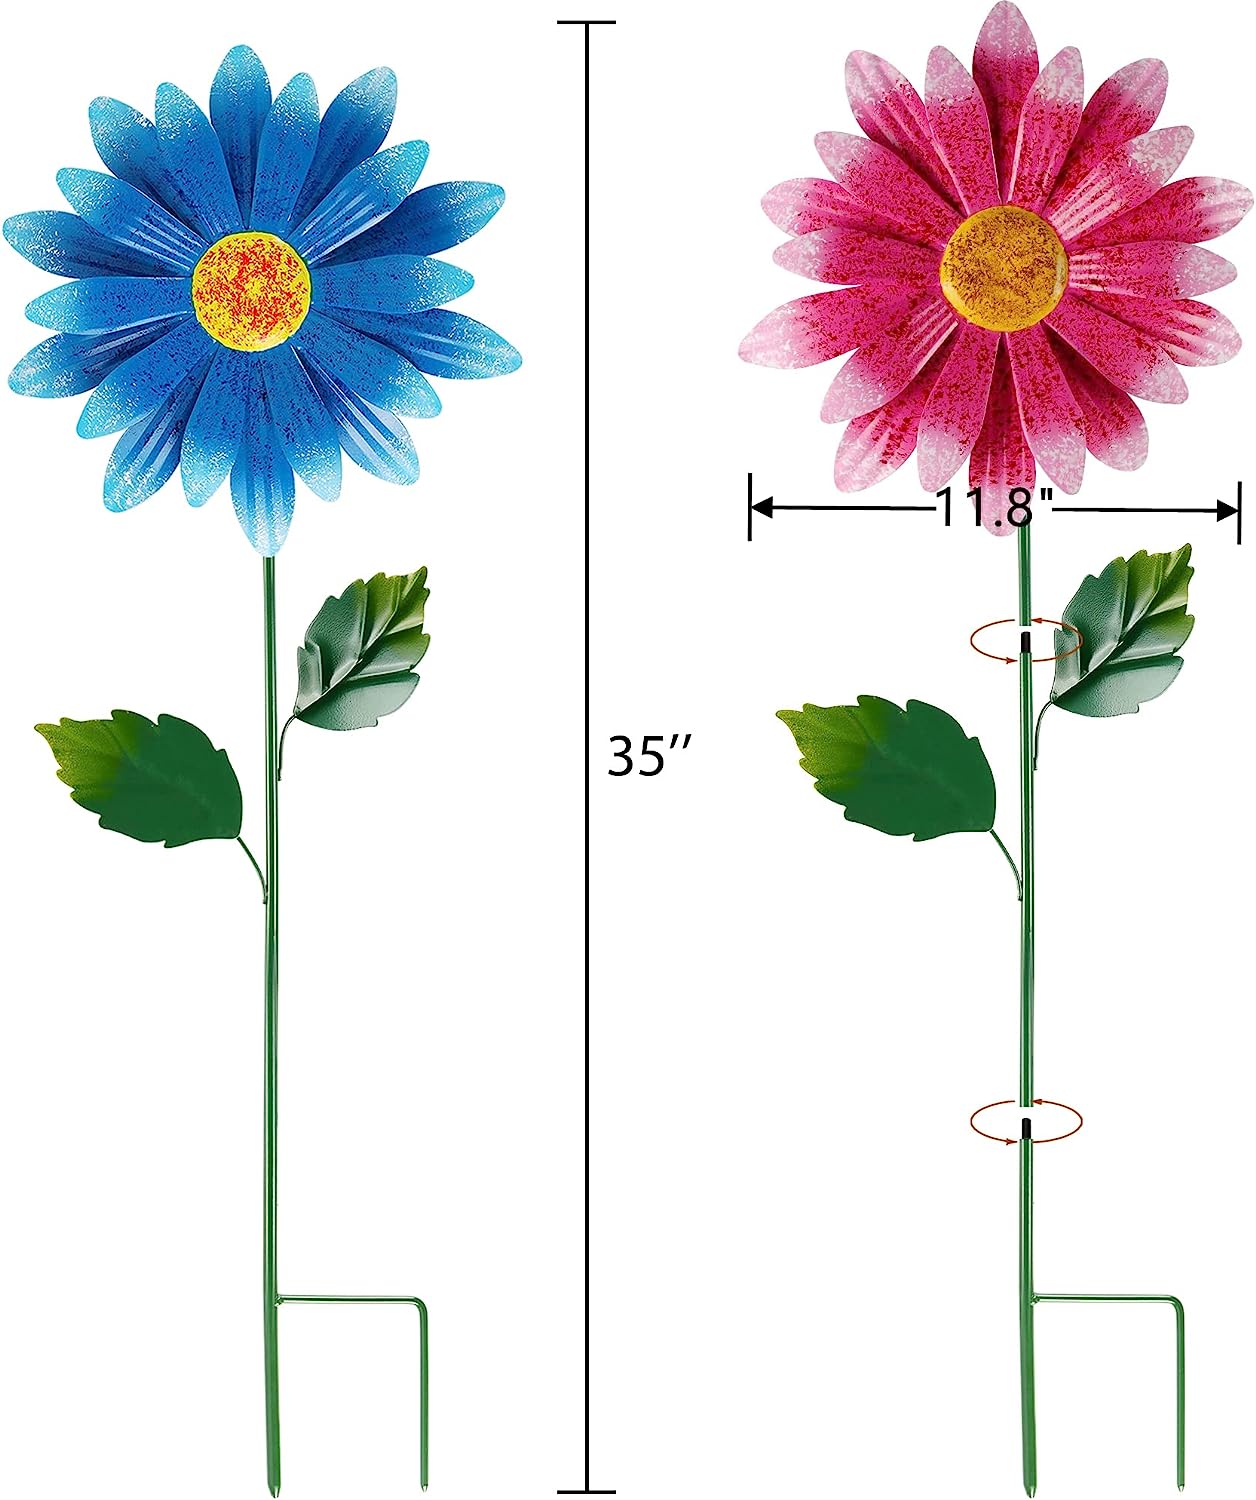 2 Pack Flower Garden Stakes Decor, 35 Inch Outdoor Large Metal Colorful Sunflowers Daisy Yard Art, Rust Proof Metal Plant Sticks, Indoor Outdoor Fall Lawn Pathway Patio Art Decorations